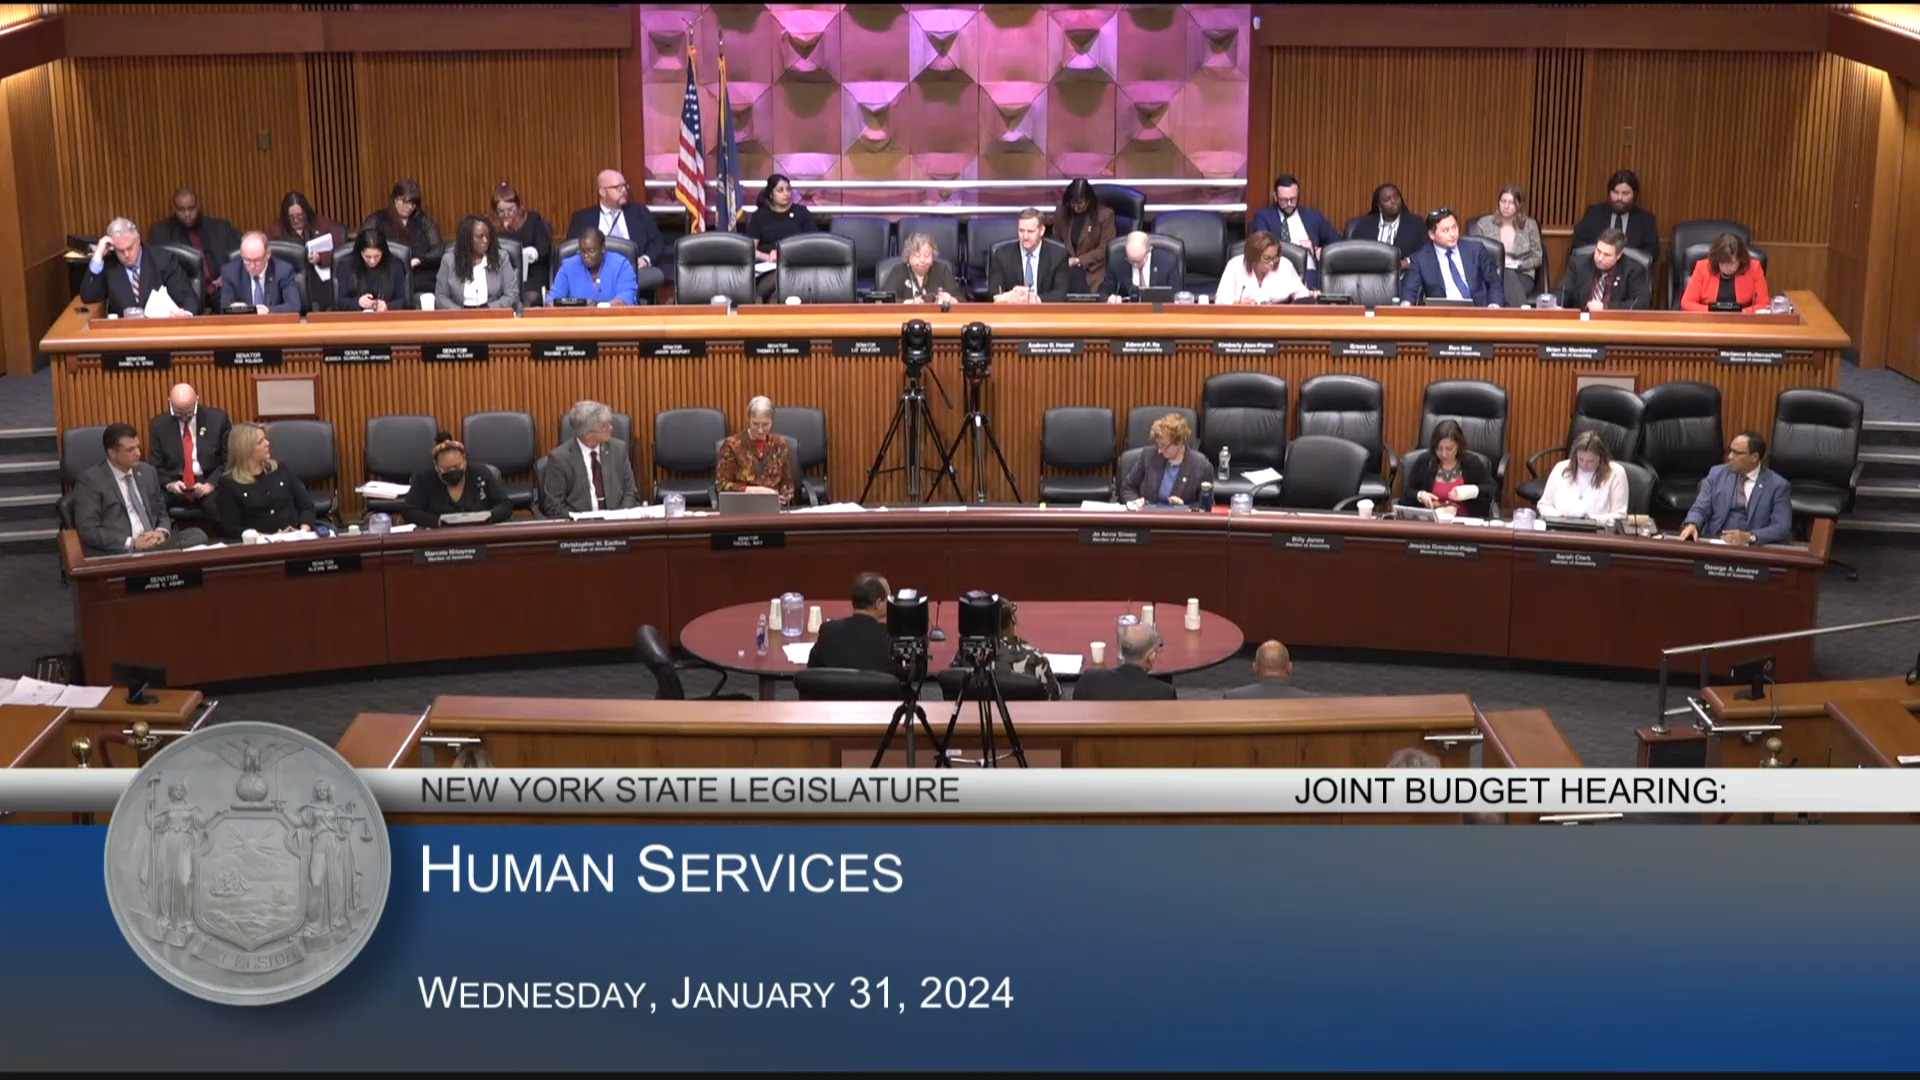 NYS Office for the Aging Acting Director Testifies During Budget Hearing on Human Services